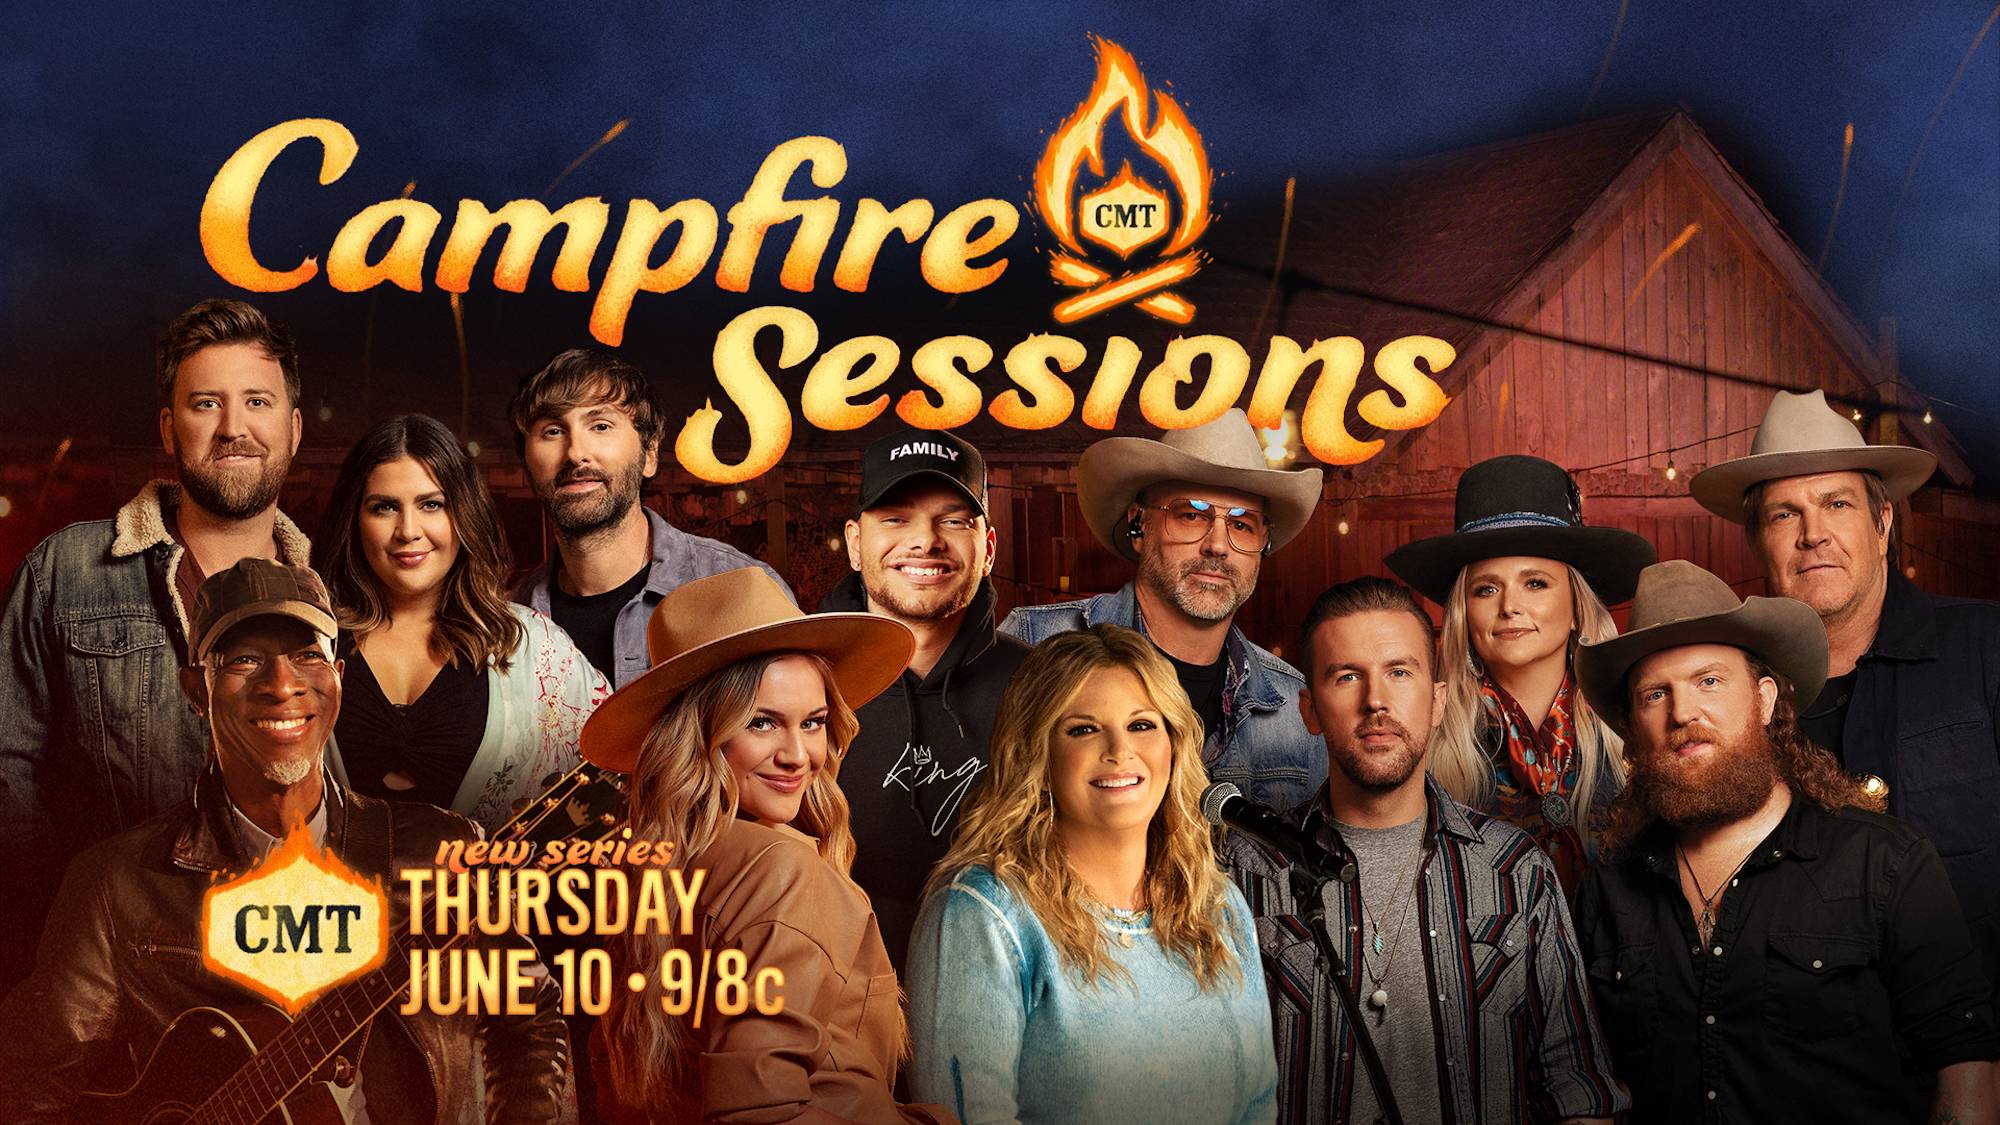 CMT To Premiere AllNew CMT Campfire Sessions Series with Superstar